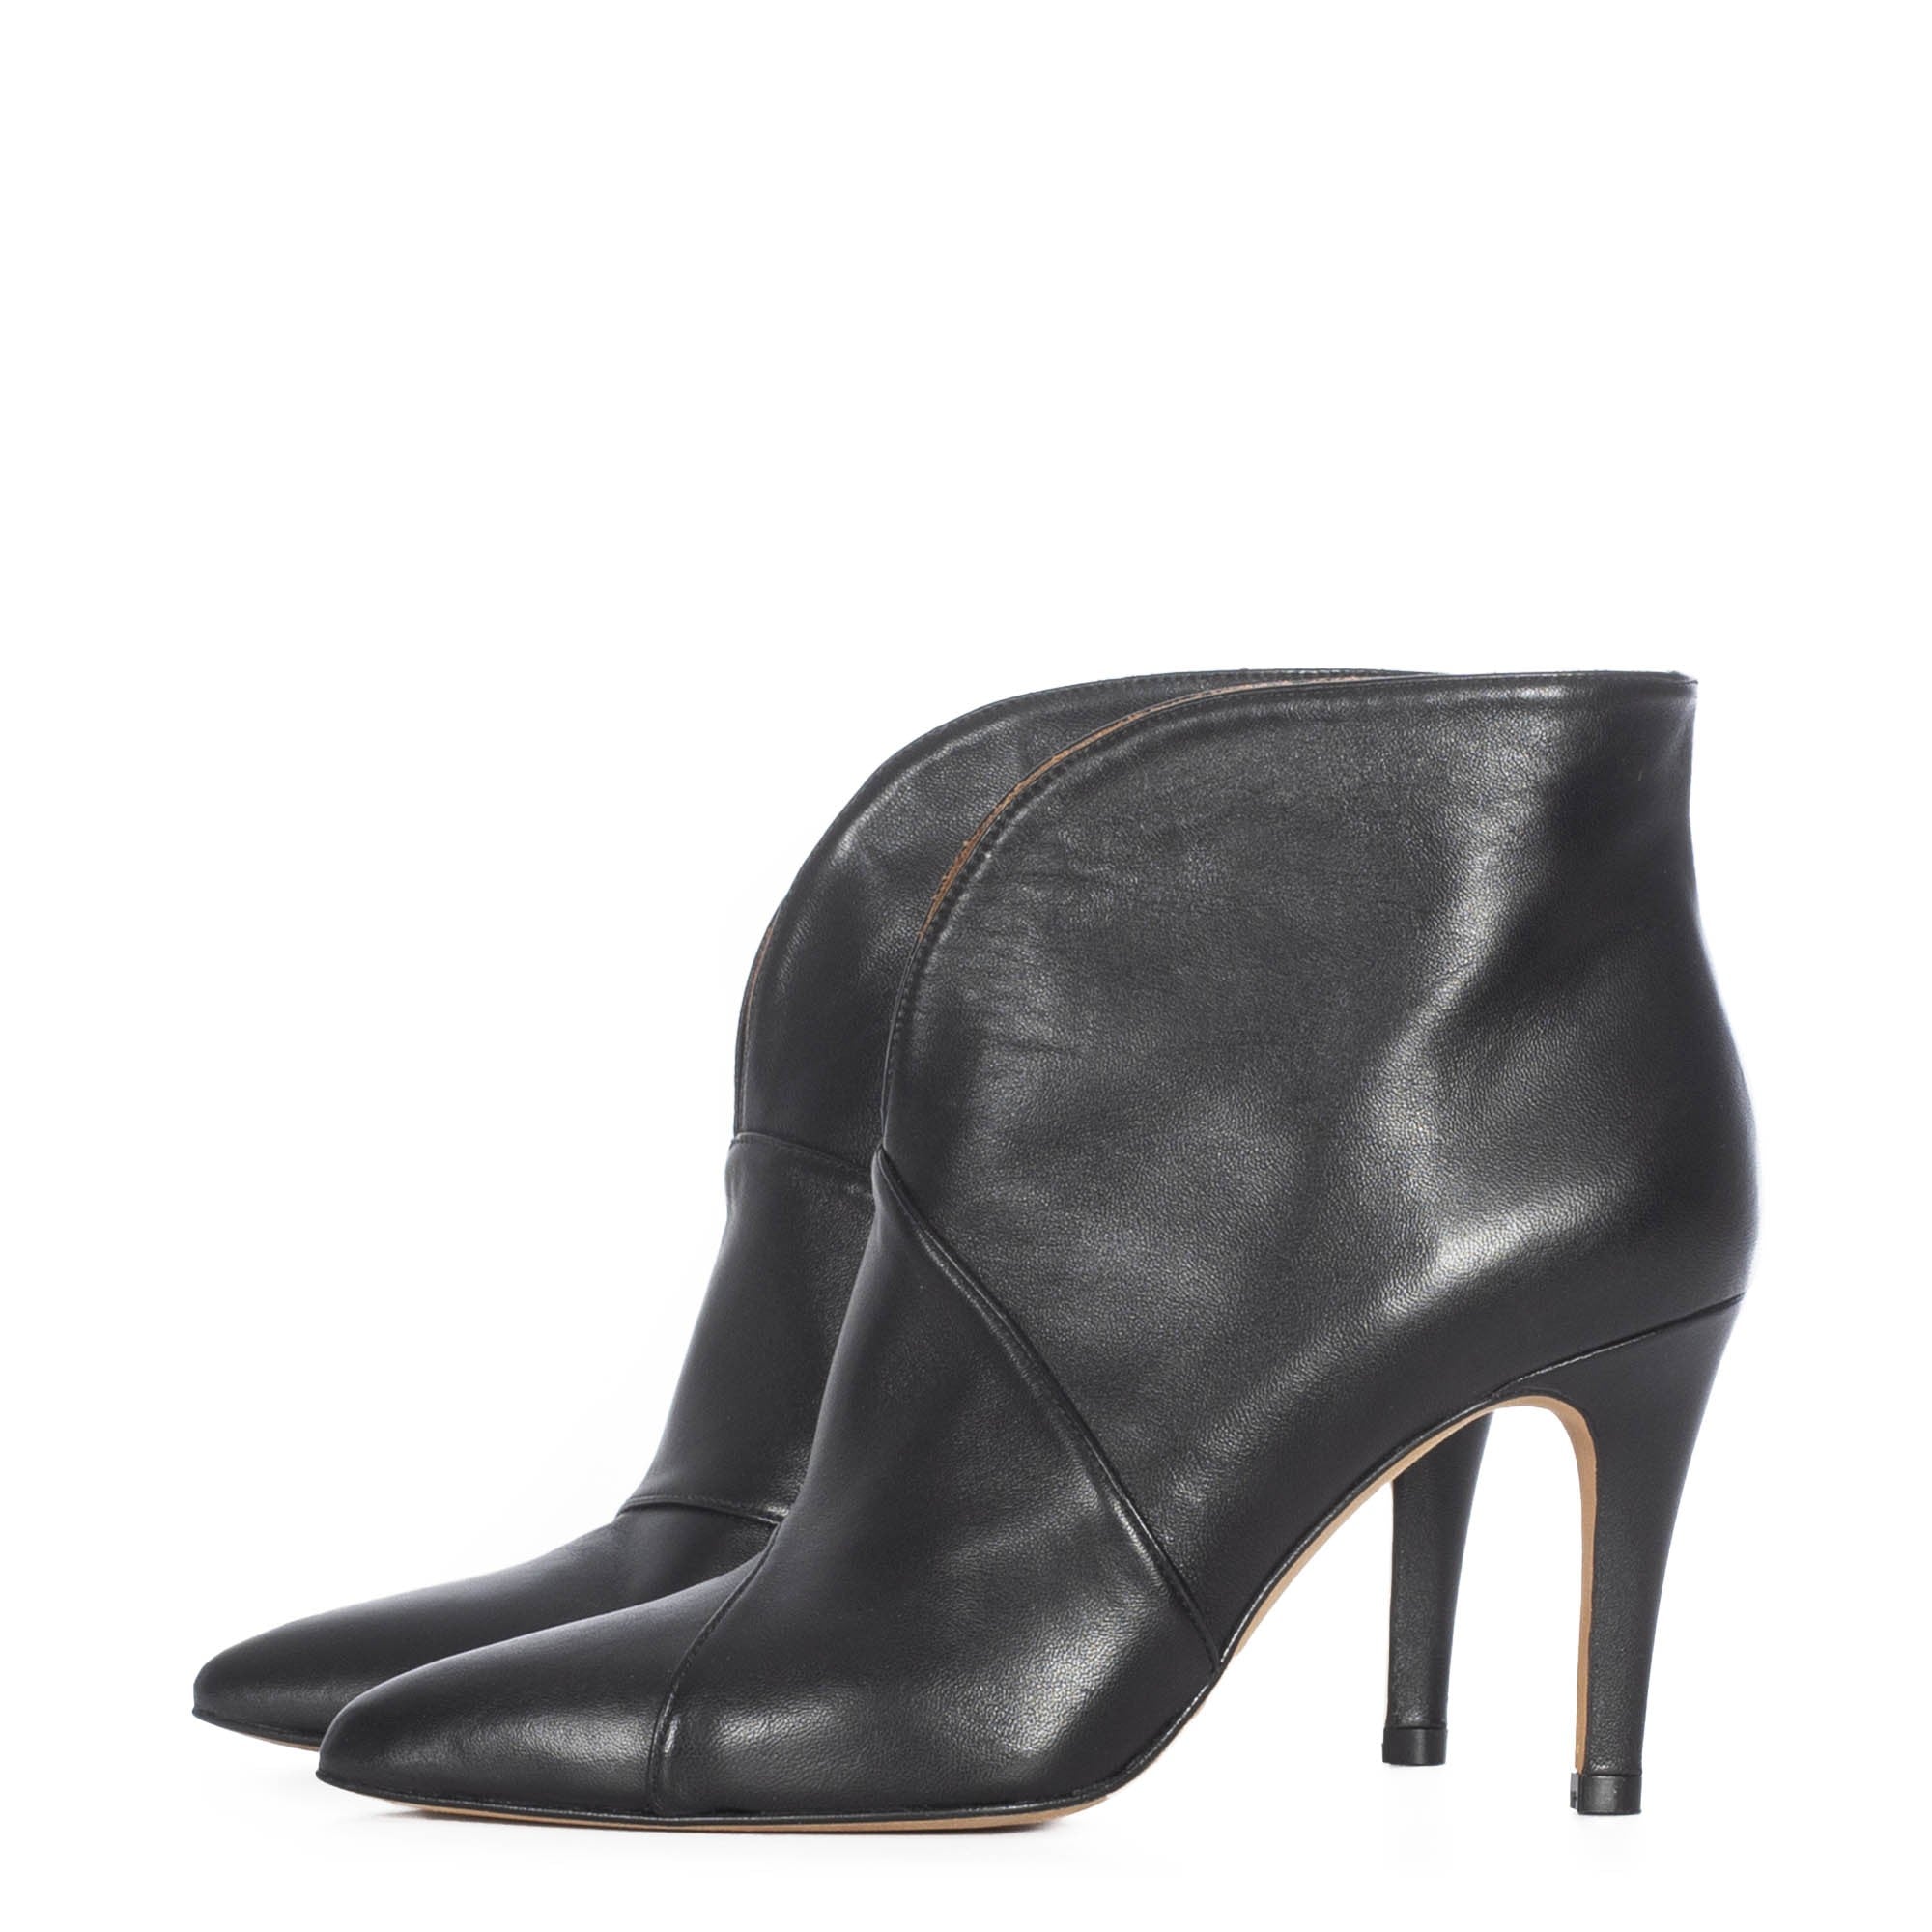 TORAL BLACK LEATHER ANKLE BOOTS (6947899310220)